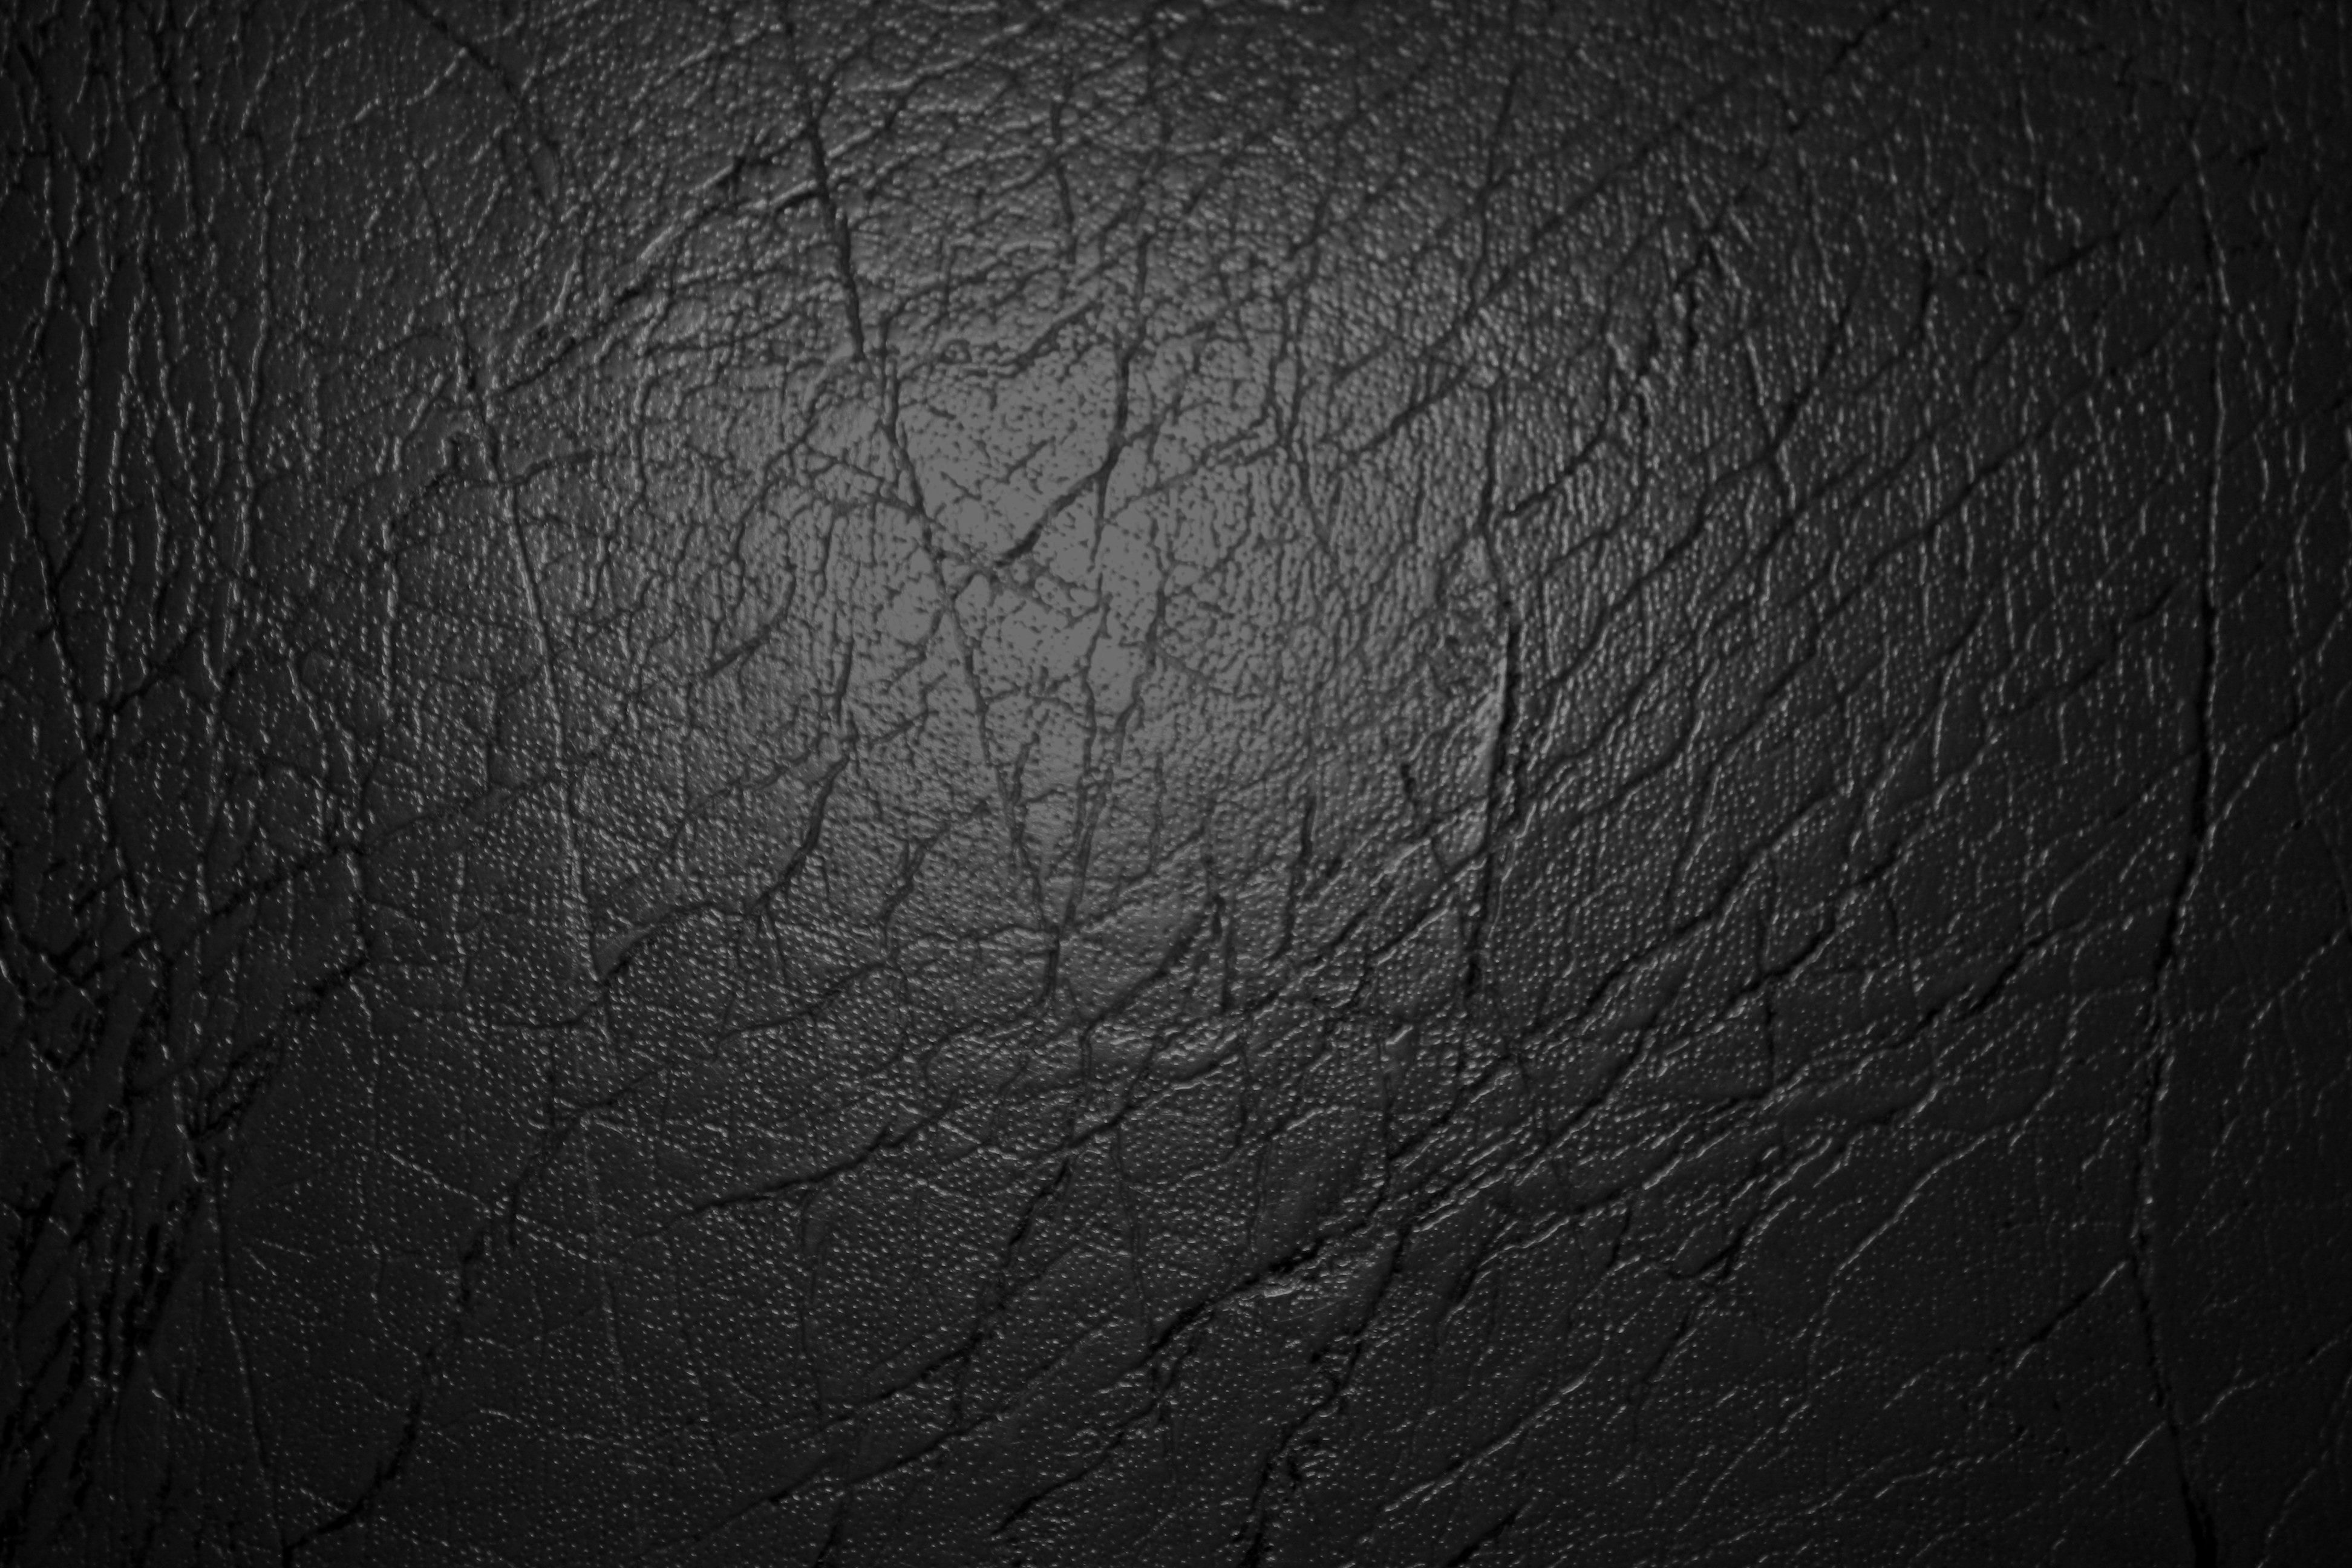 leather texture photoshop free download